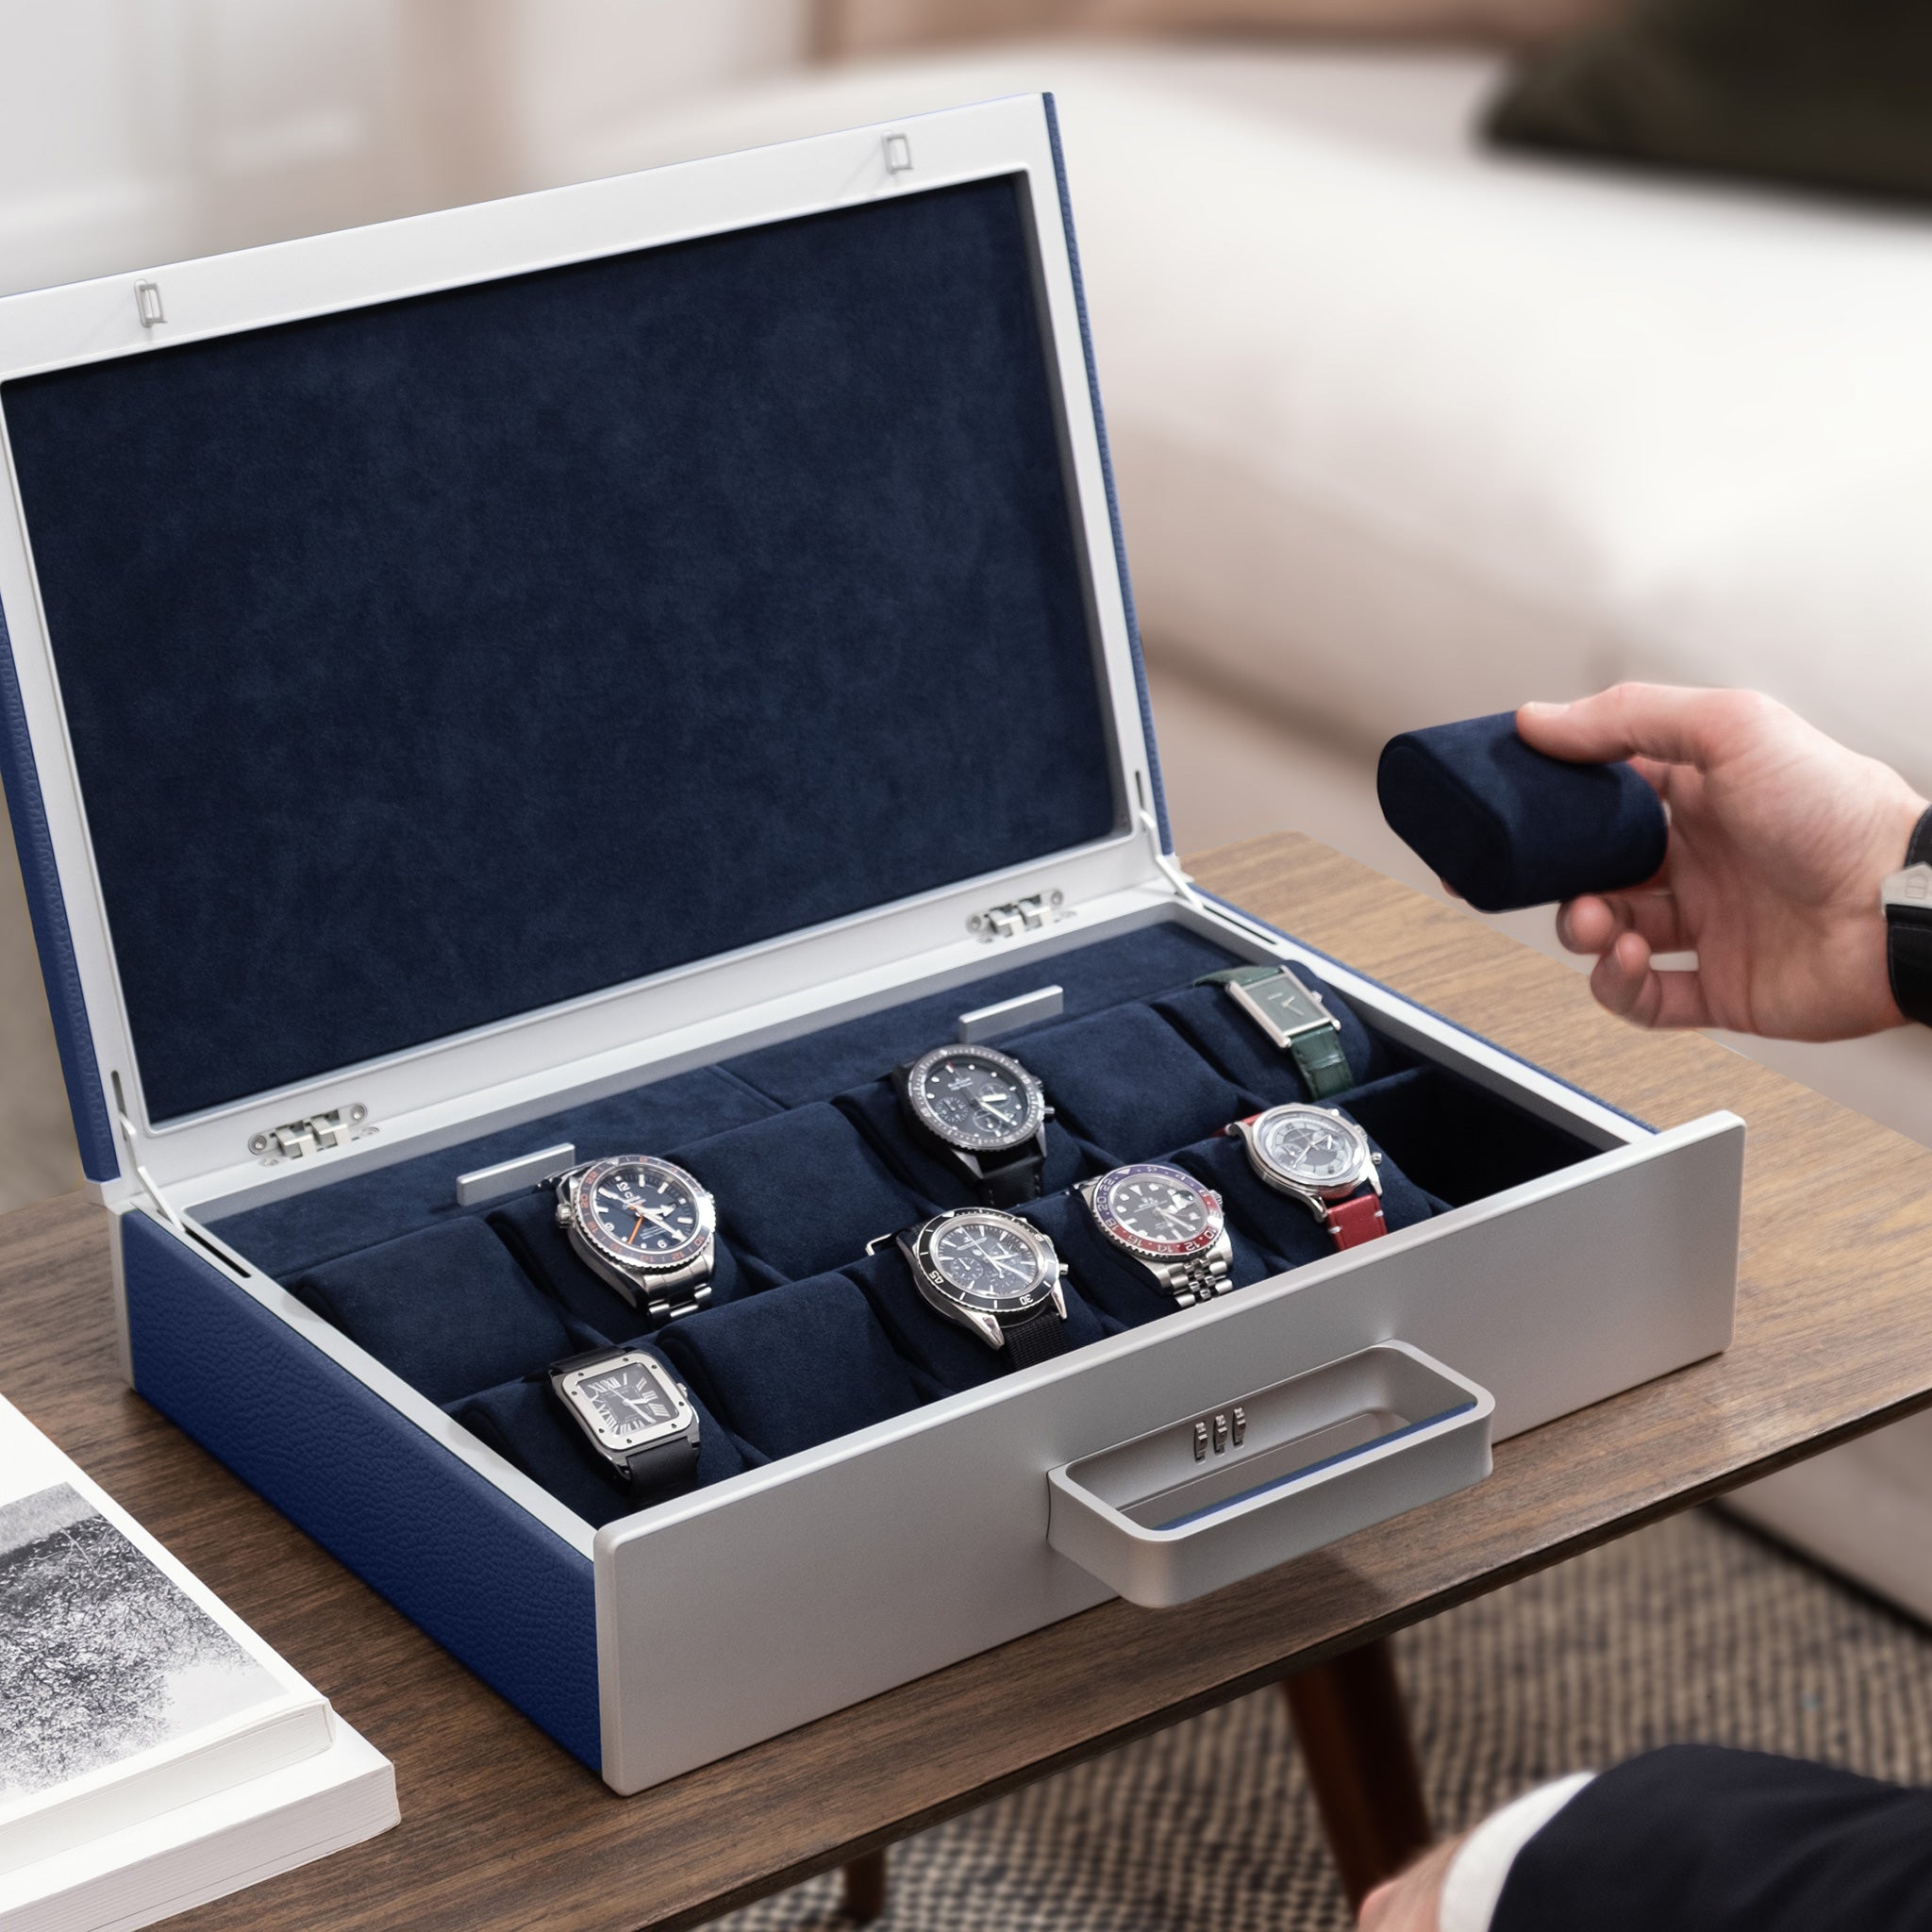 Lifestyle picture of man taking deep blue removable Alcantara cushion from sapphire Mackenzie watch briefcase holding 7 luxury watches including Rolex, Omega and Cartier